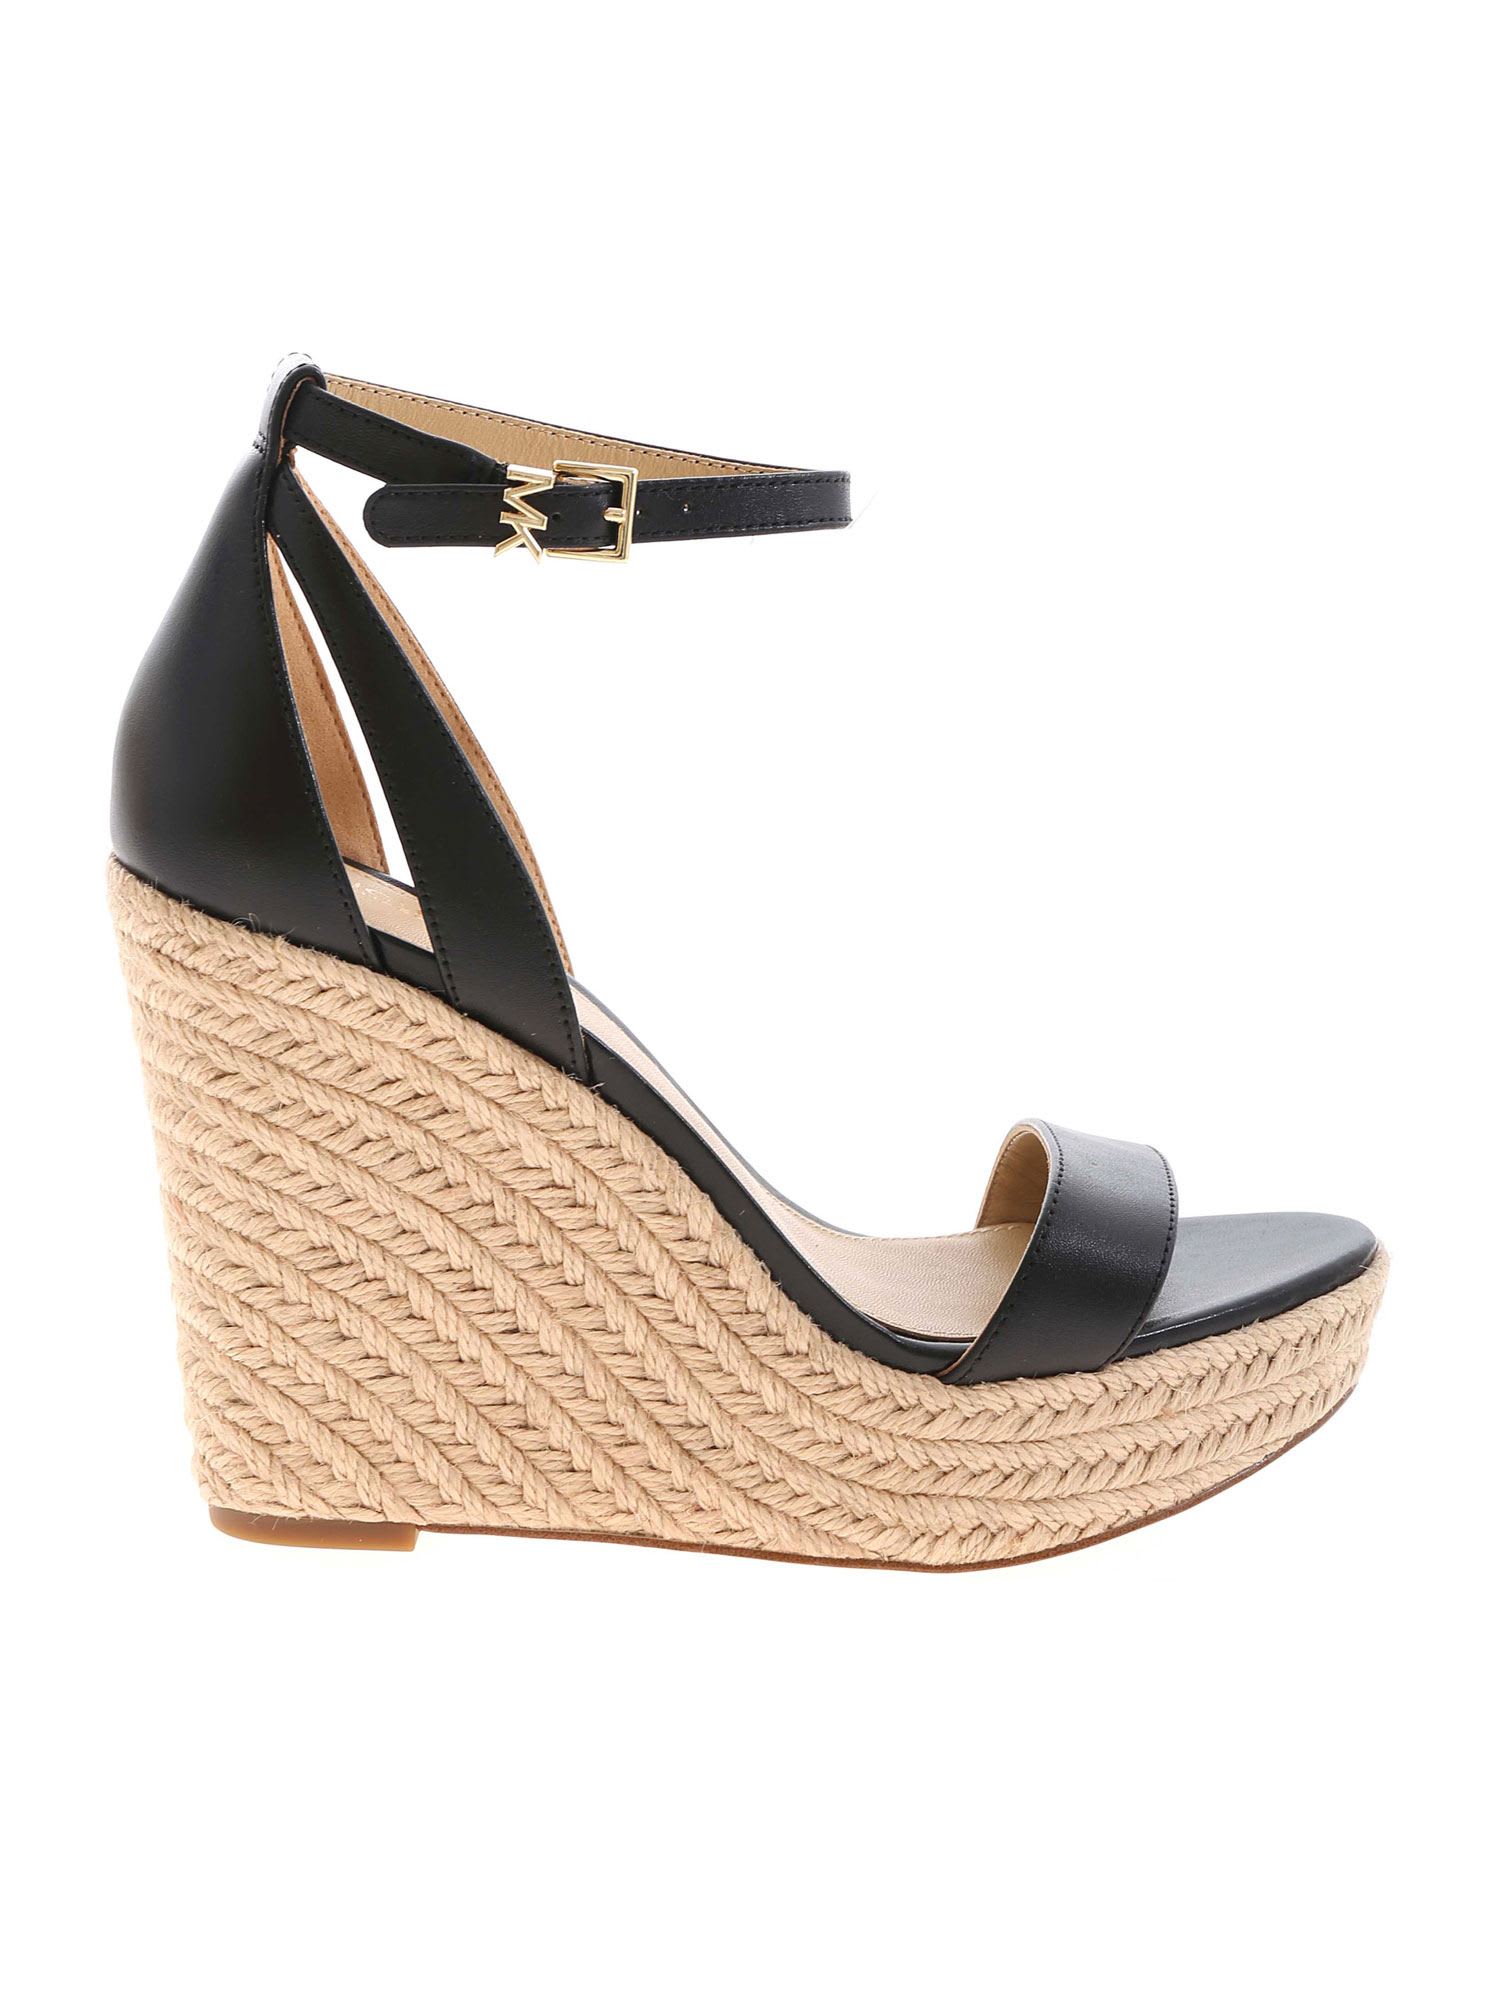 Buy Michael Kors Wedges online, shop Michael Kors shoes with free shipping